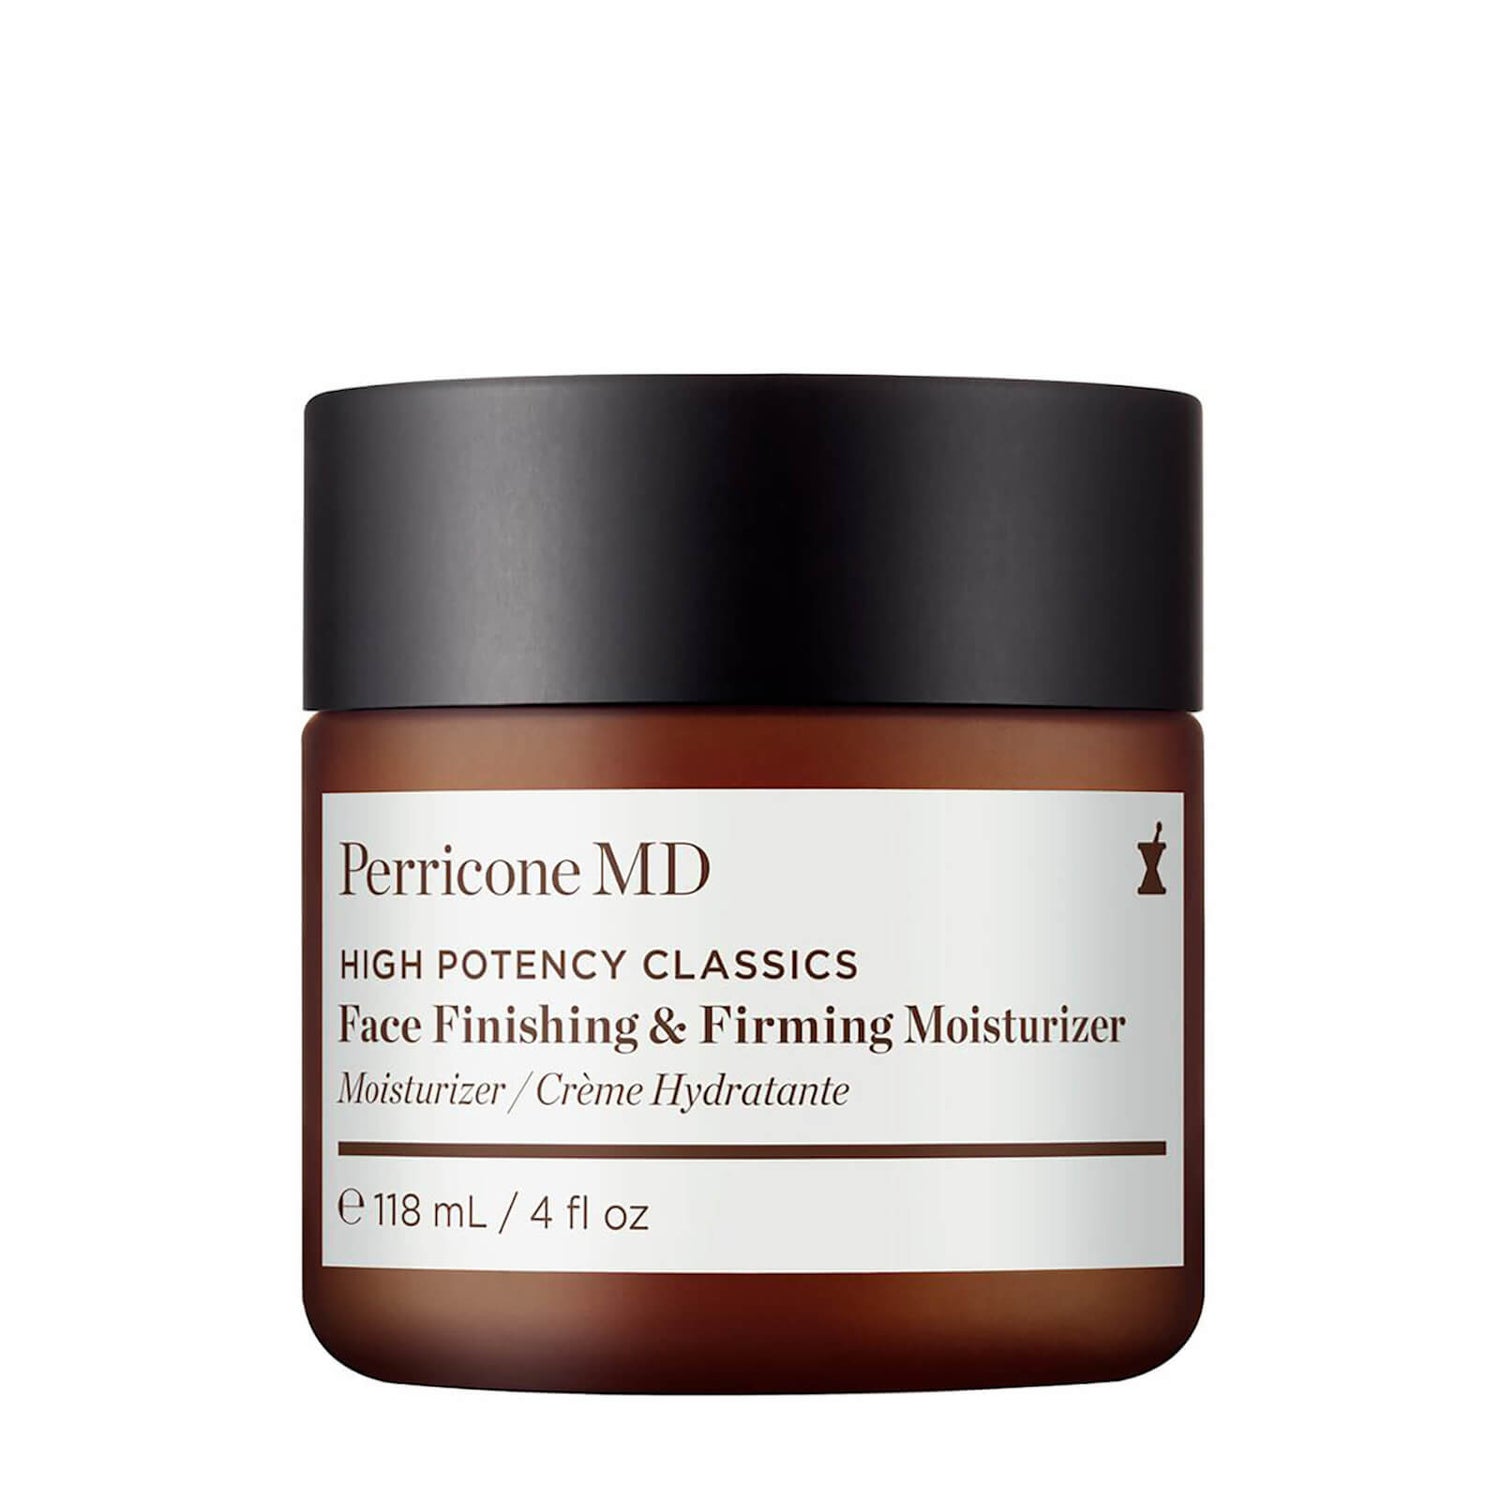 Perricone MD Face Finishing Firming Moisturizer